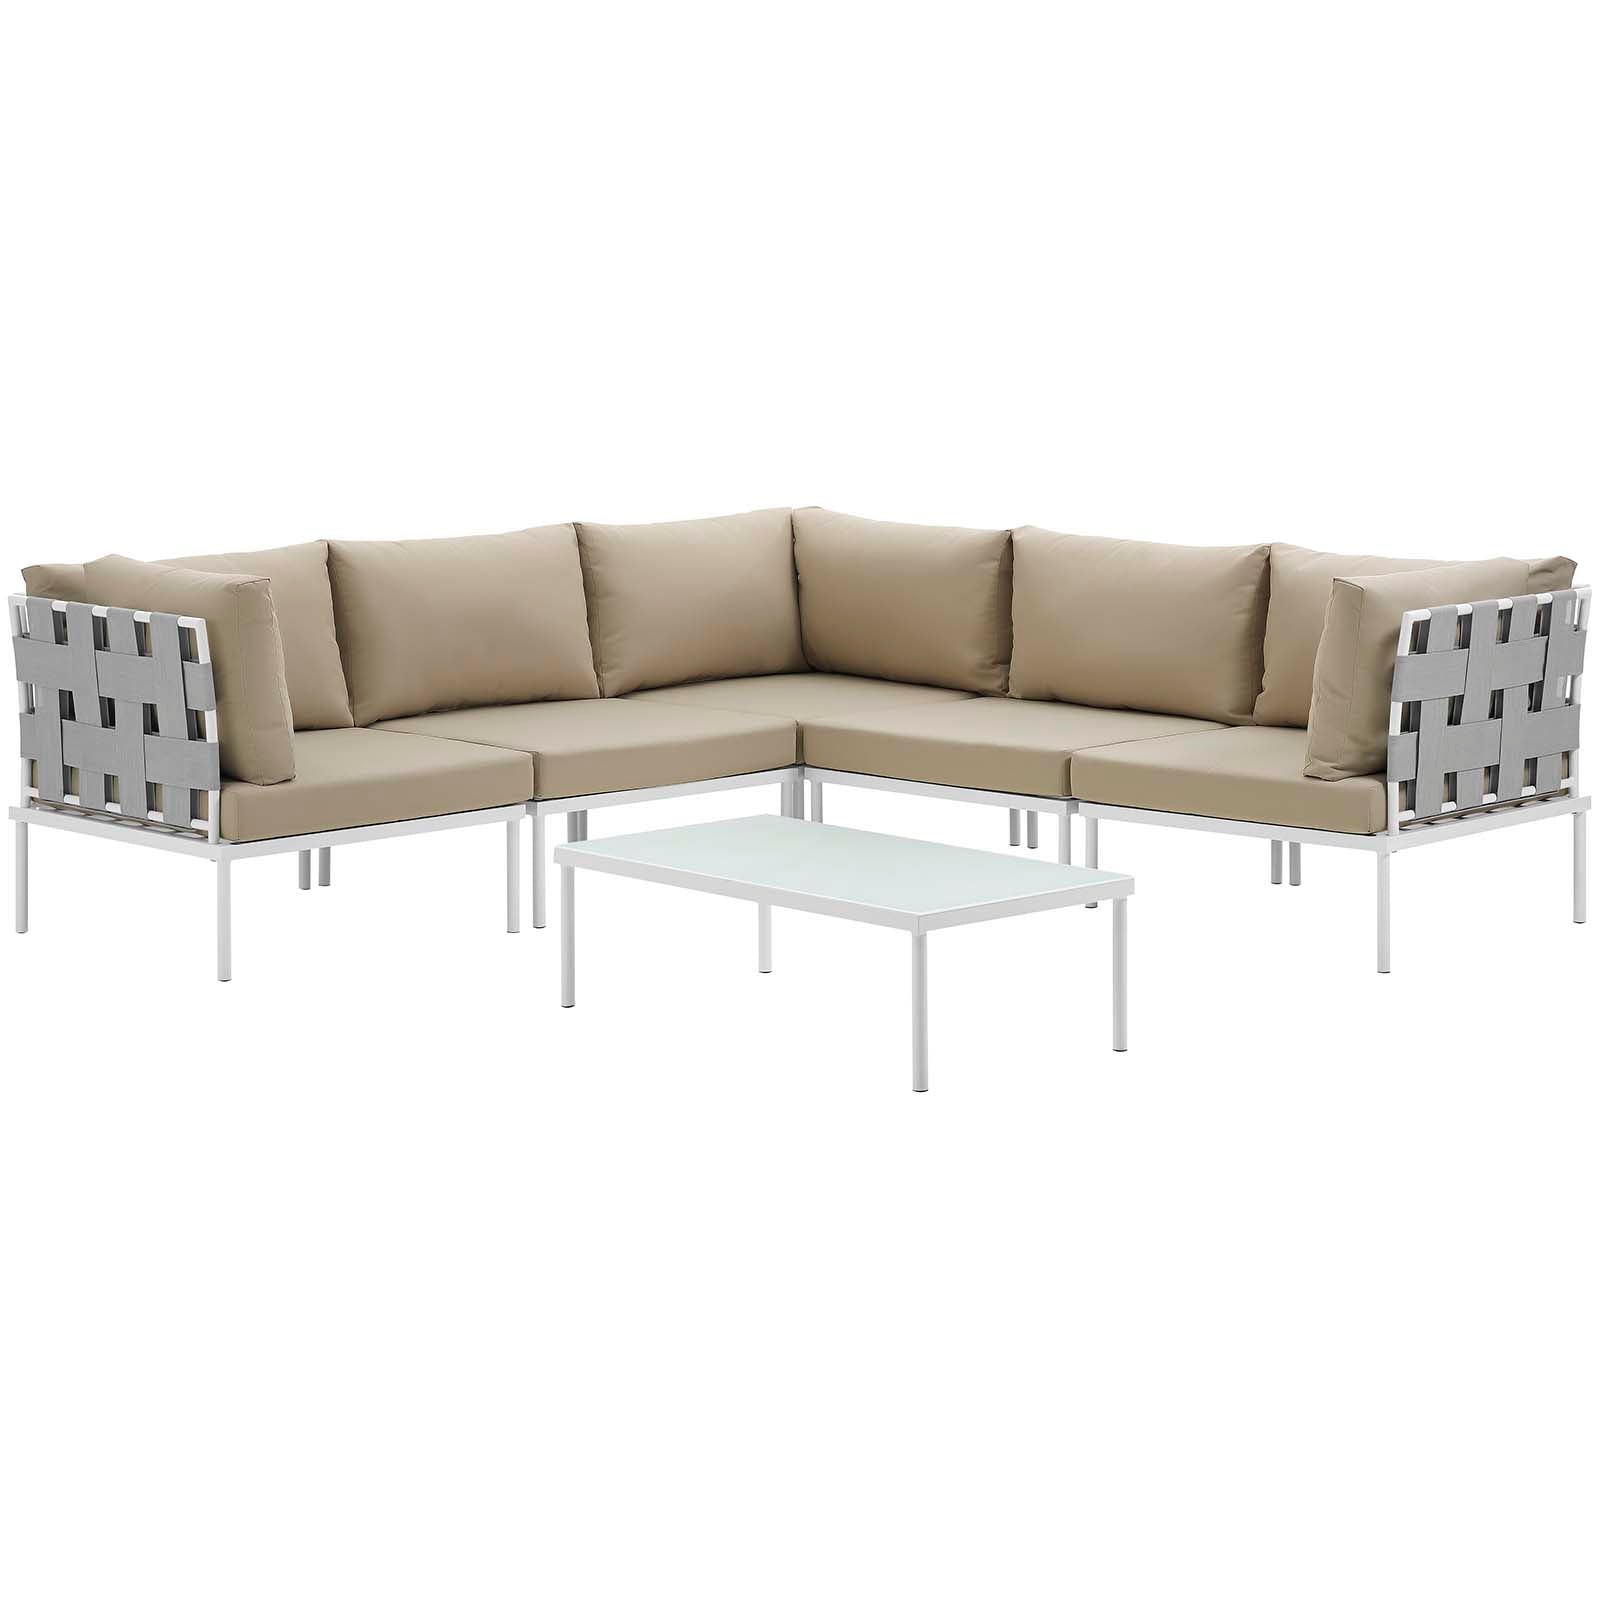 Modway Outdoor Conversation Sets - Harmony 6 Piece Outdoor 99"W Patio Aluminum Sectional Sofa Set Whit